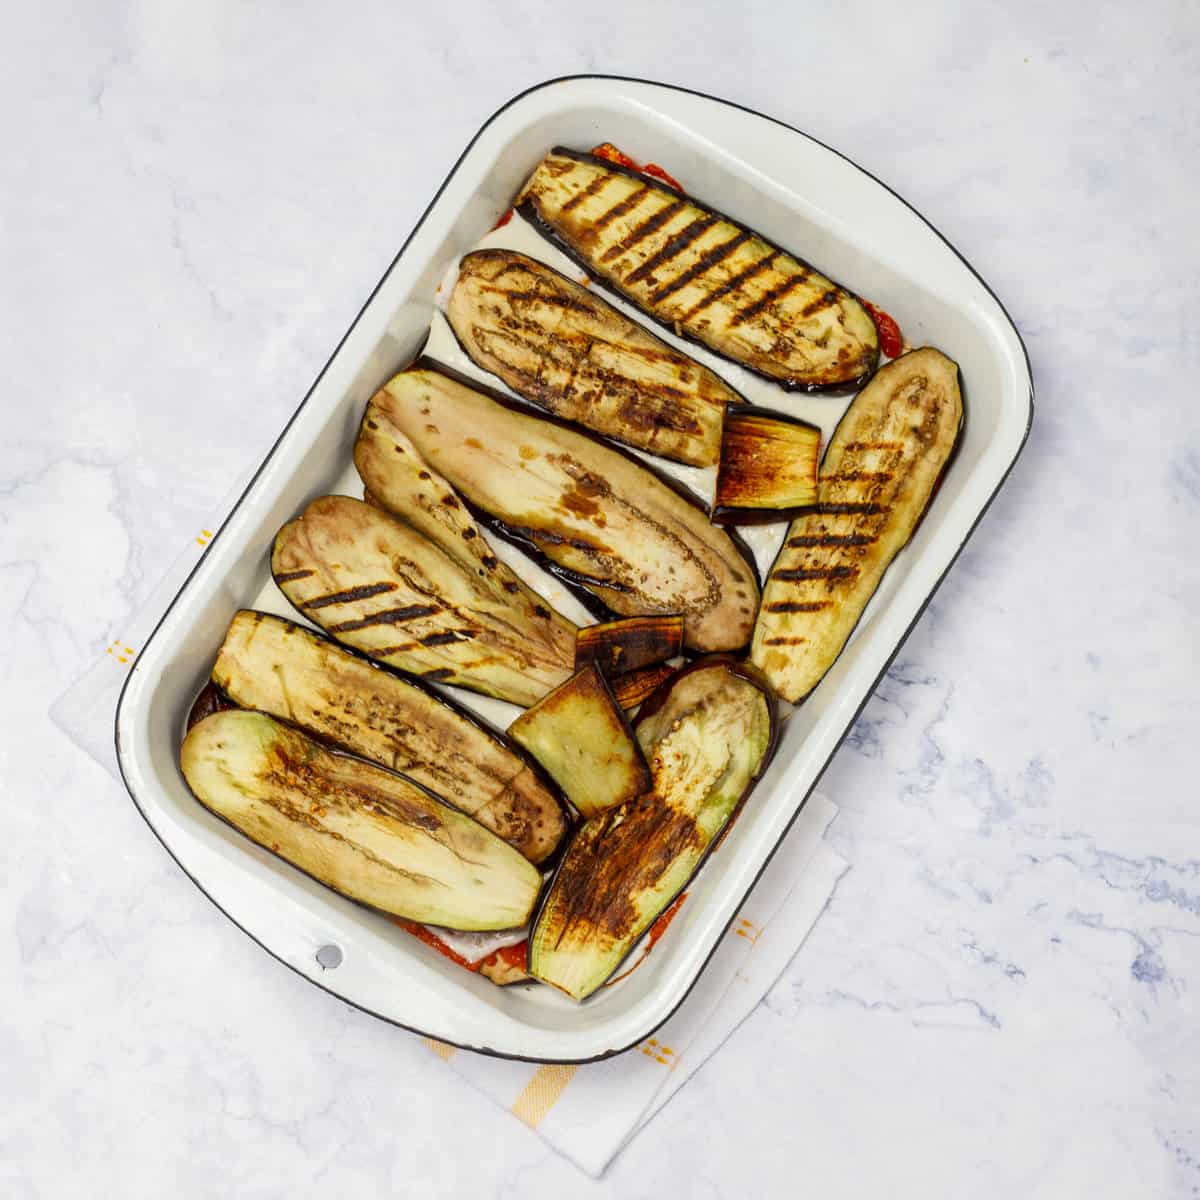 Grilled eggplant slices in backing try